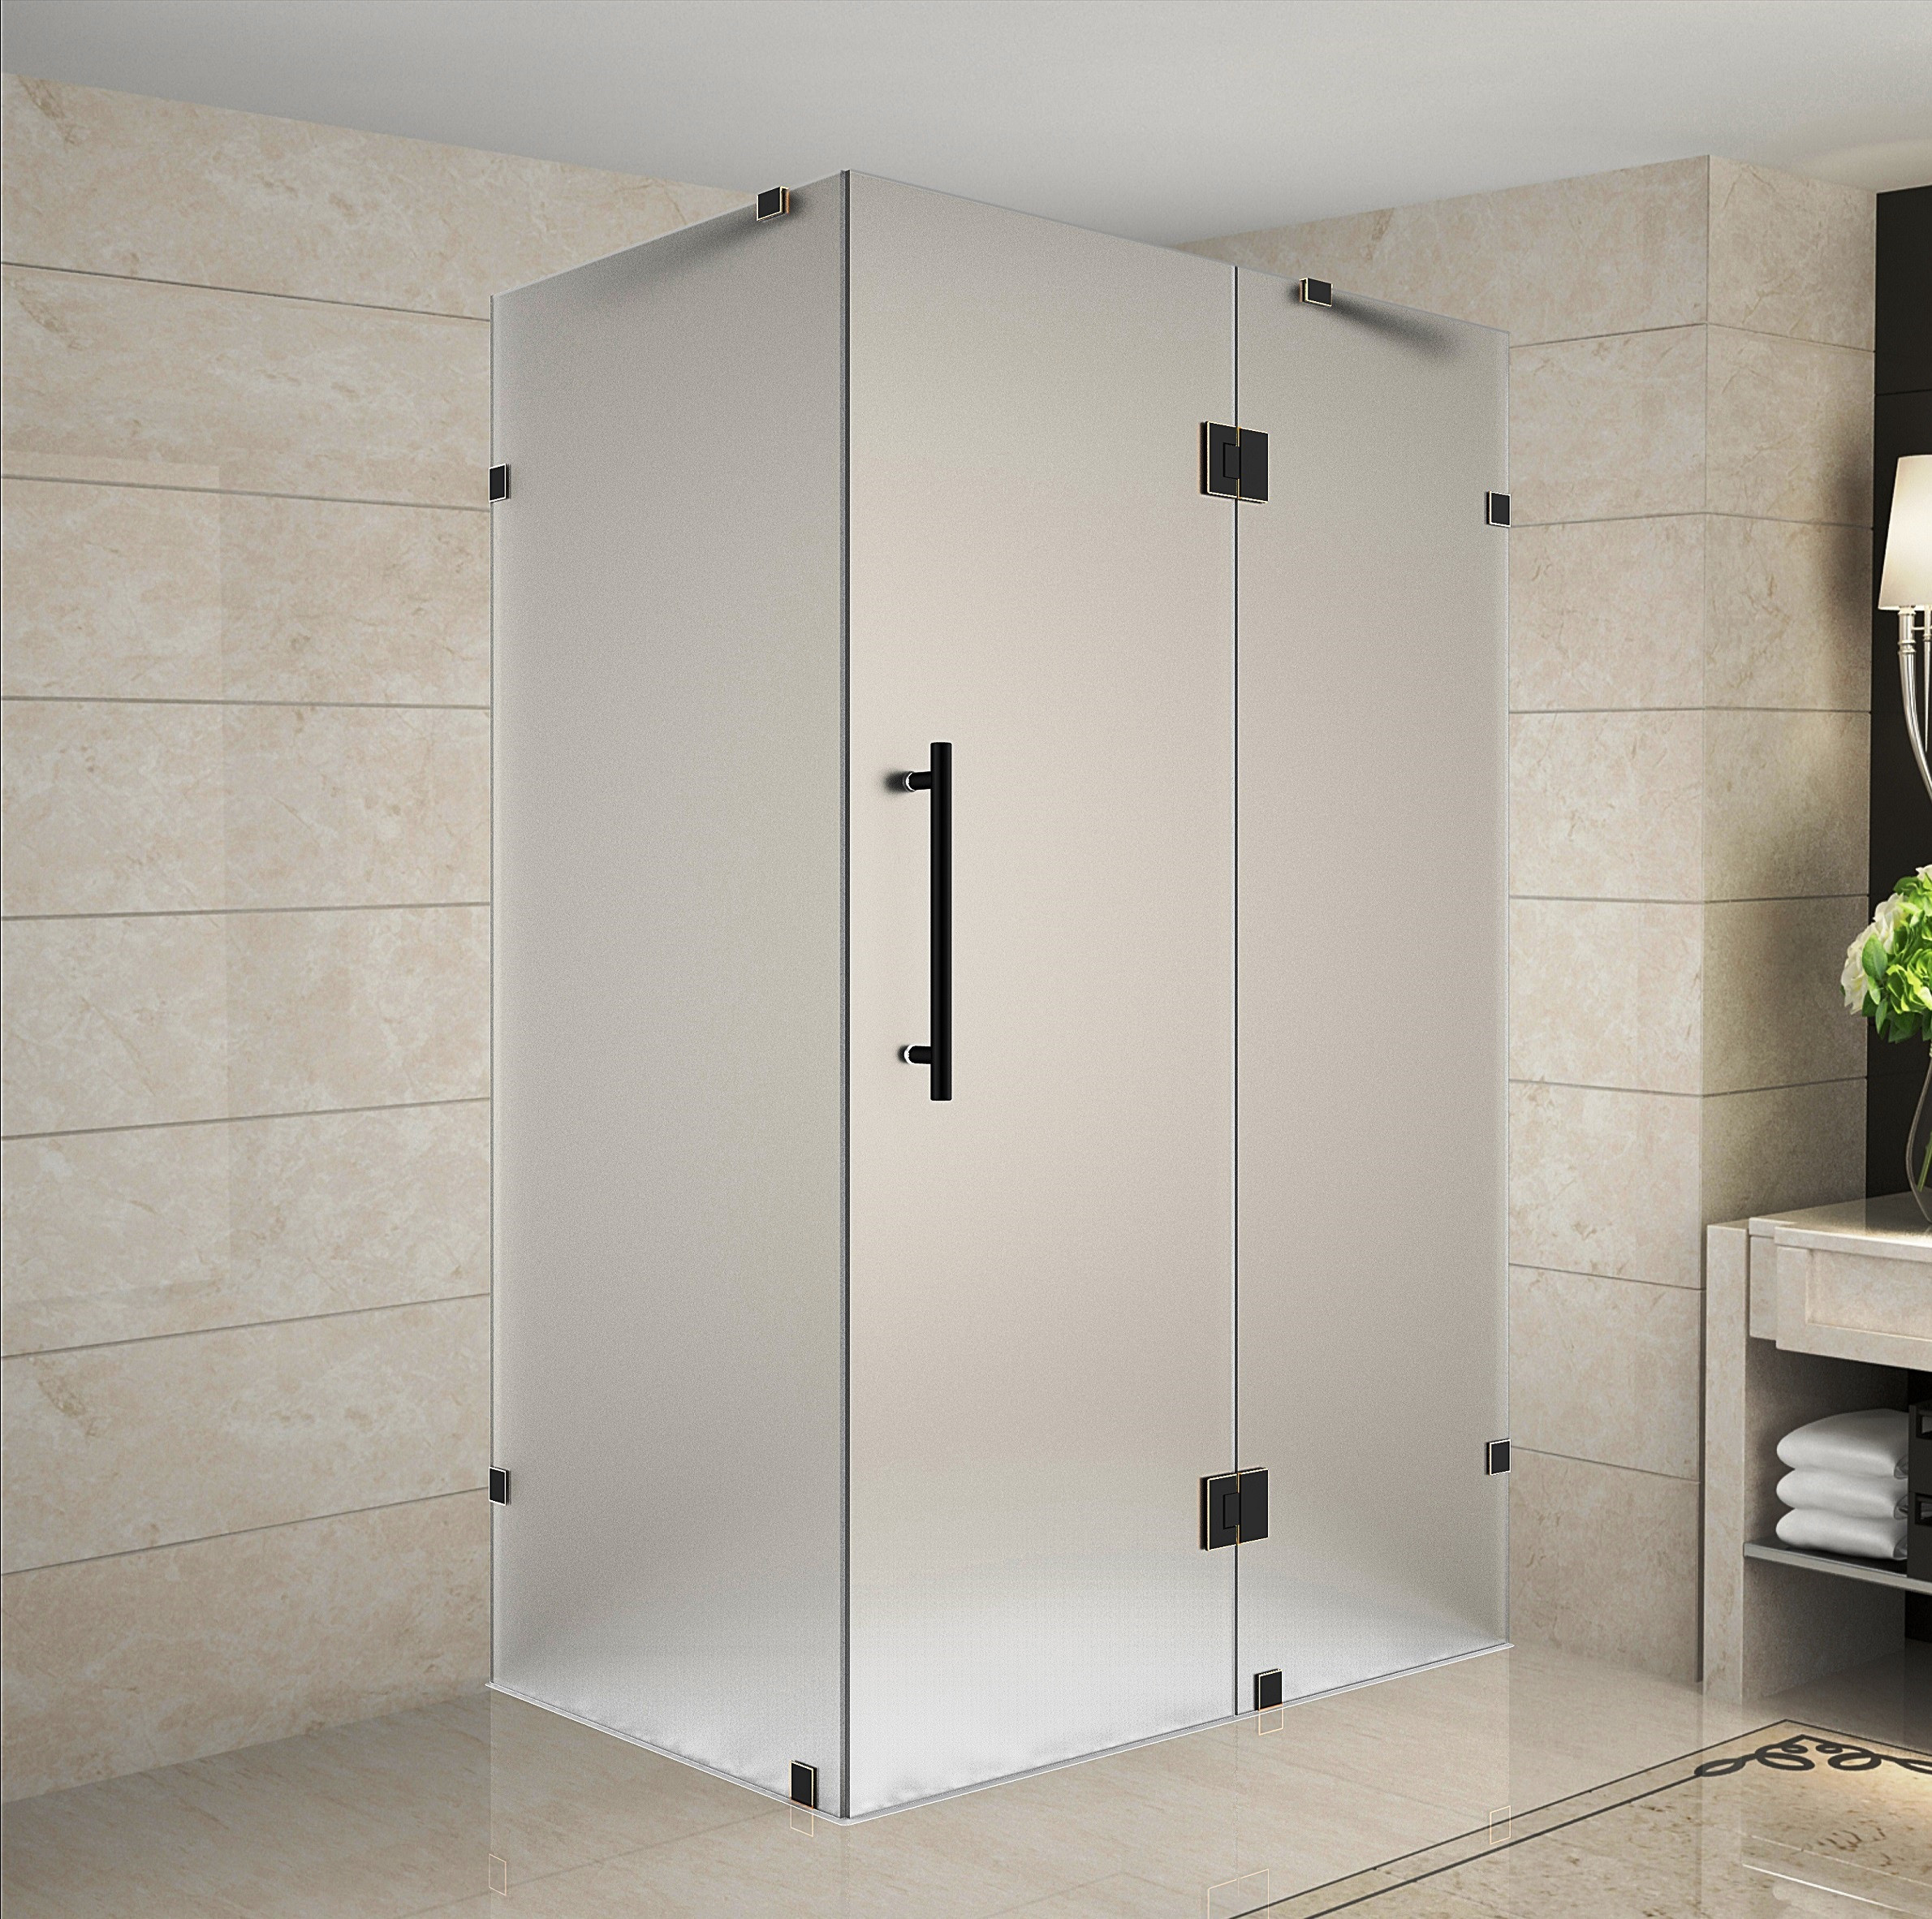 Aston Global SEN987F-ORB-3234-10 Frameless Frosted Glass Shower Enclosure In Oil Rubbed Bronze